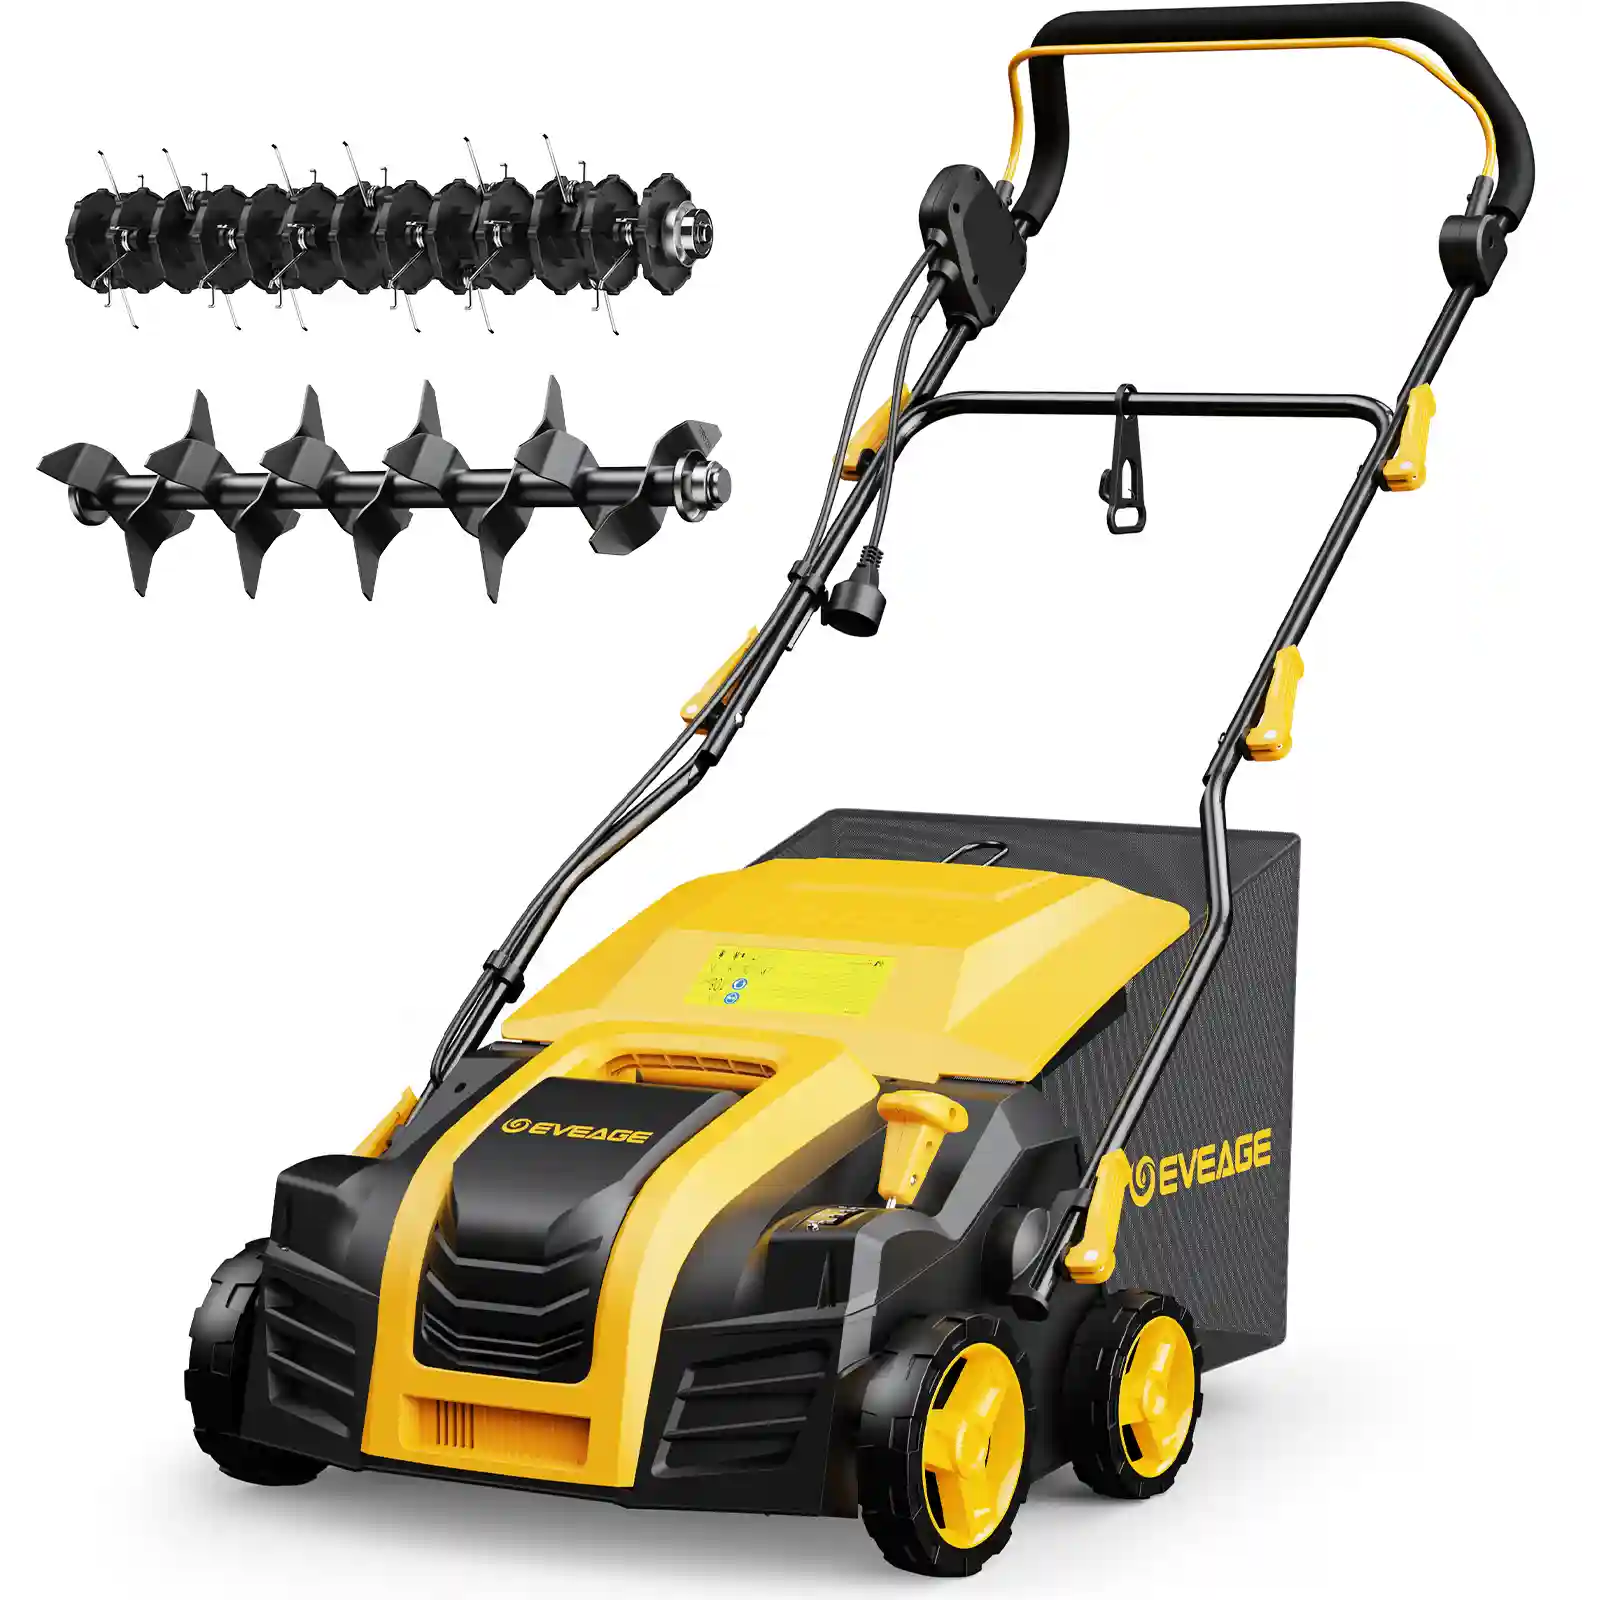 EVEAGE 16-Inch 15 Amp Electric Dethatcher & Scarifier(Pre-order, expected to ship after May 6th)